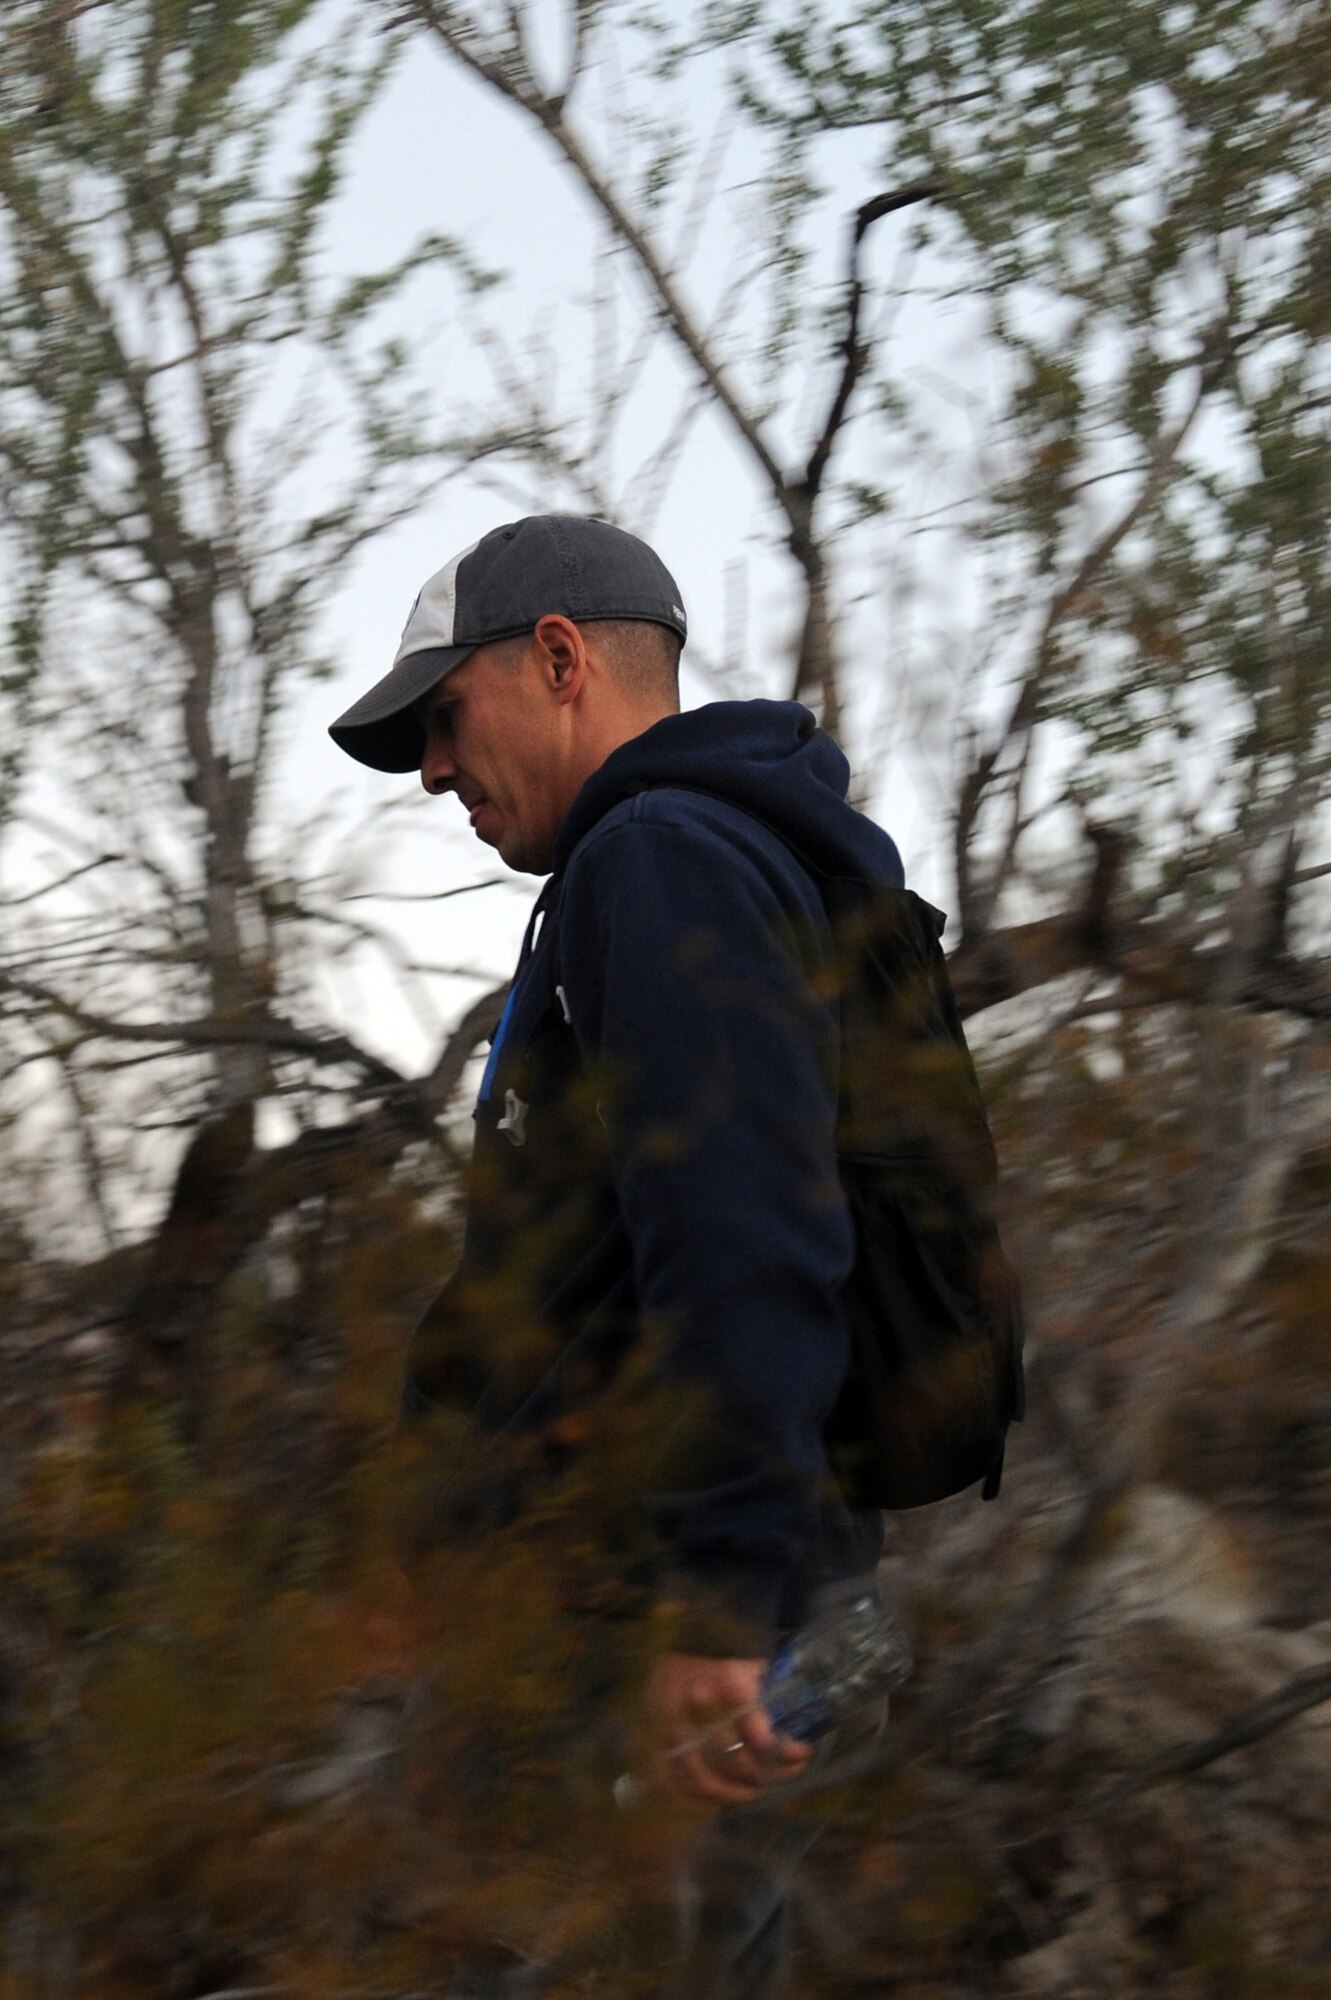 Senior Master Sgt. Mark James, 56th Maintenance Group maintenance operations flight maintenance training flight superintendent, descends the Verrado trailhead Nov. 18, 2016 at the White Tank Mountains in Surprise, Ariz. This is the first of many hikes the 56th MXG maintenance operations Airmen will participate in. (U.S. Air Force photo by Airman 1st Class Pedro Mota)